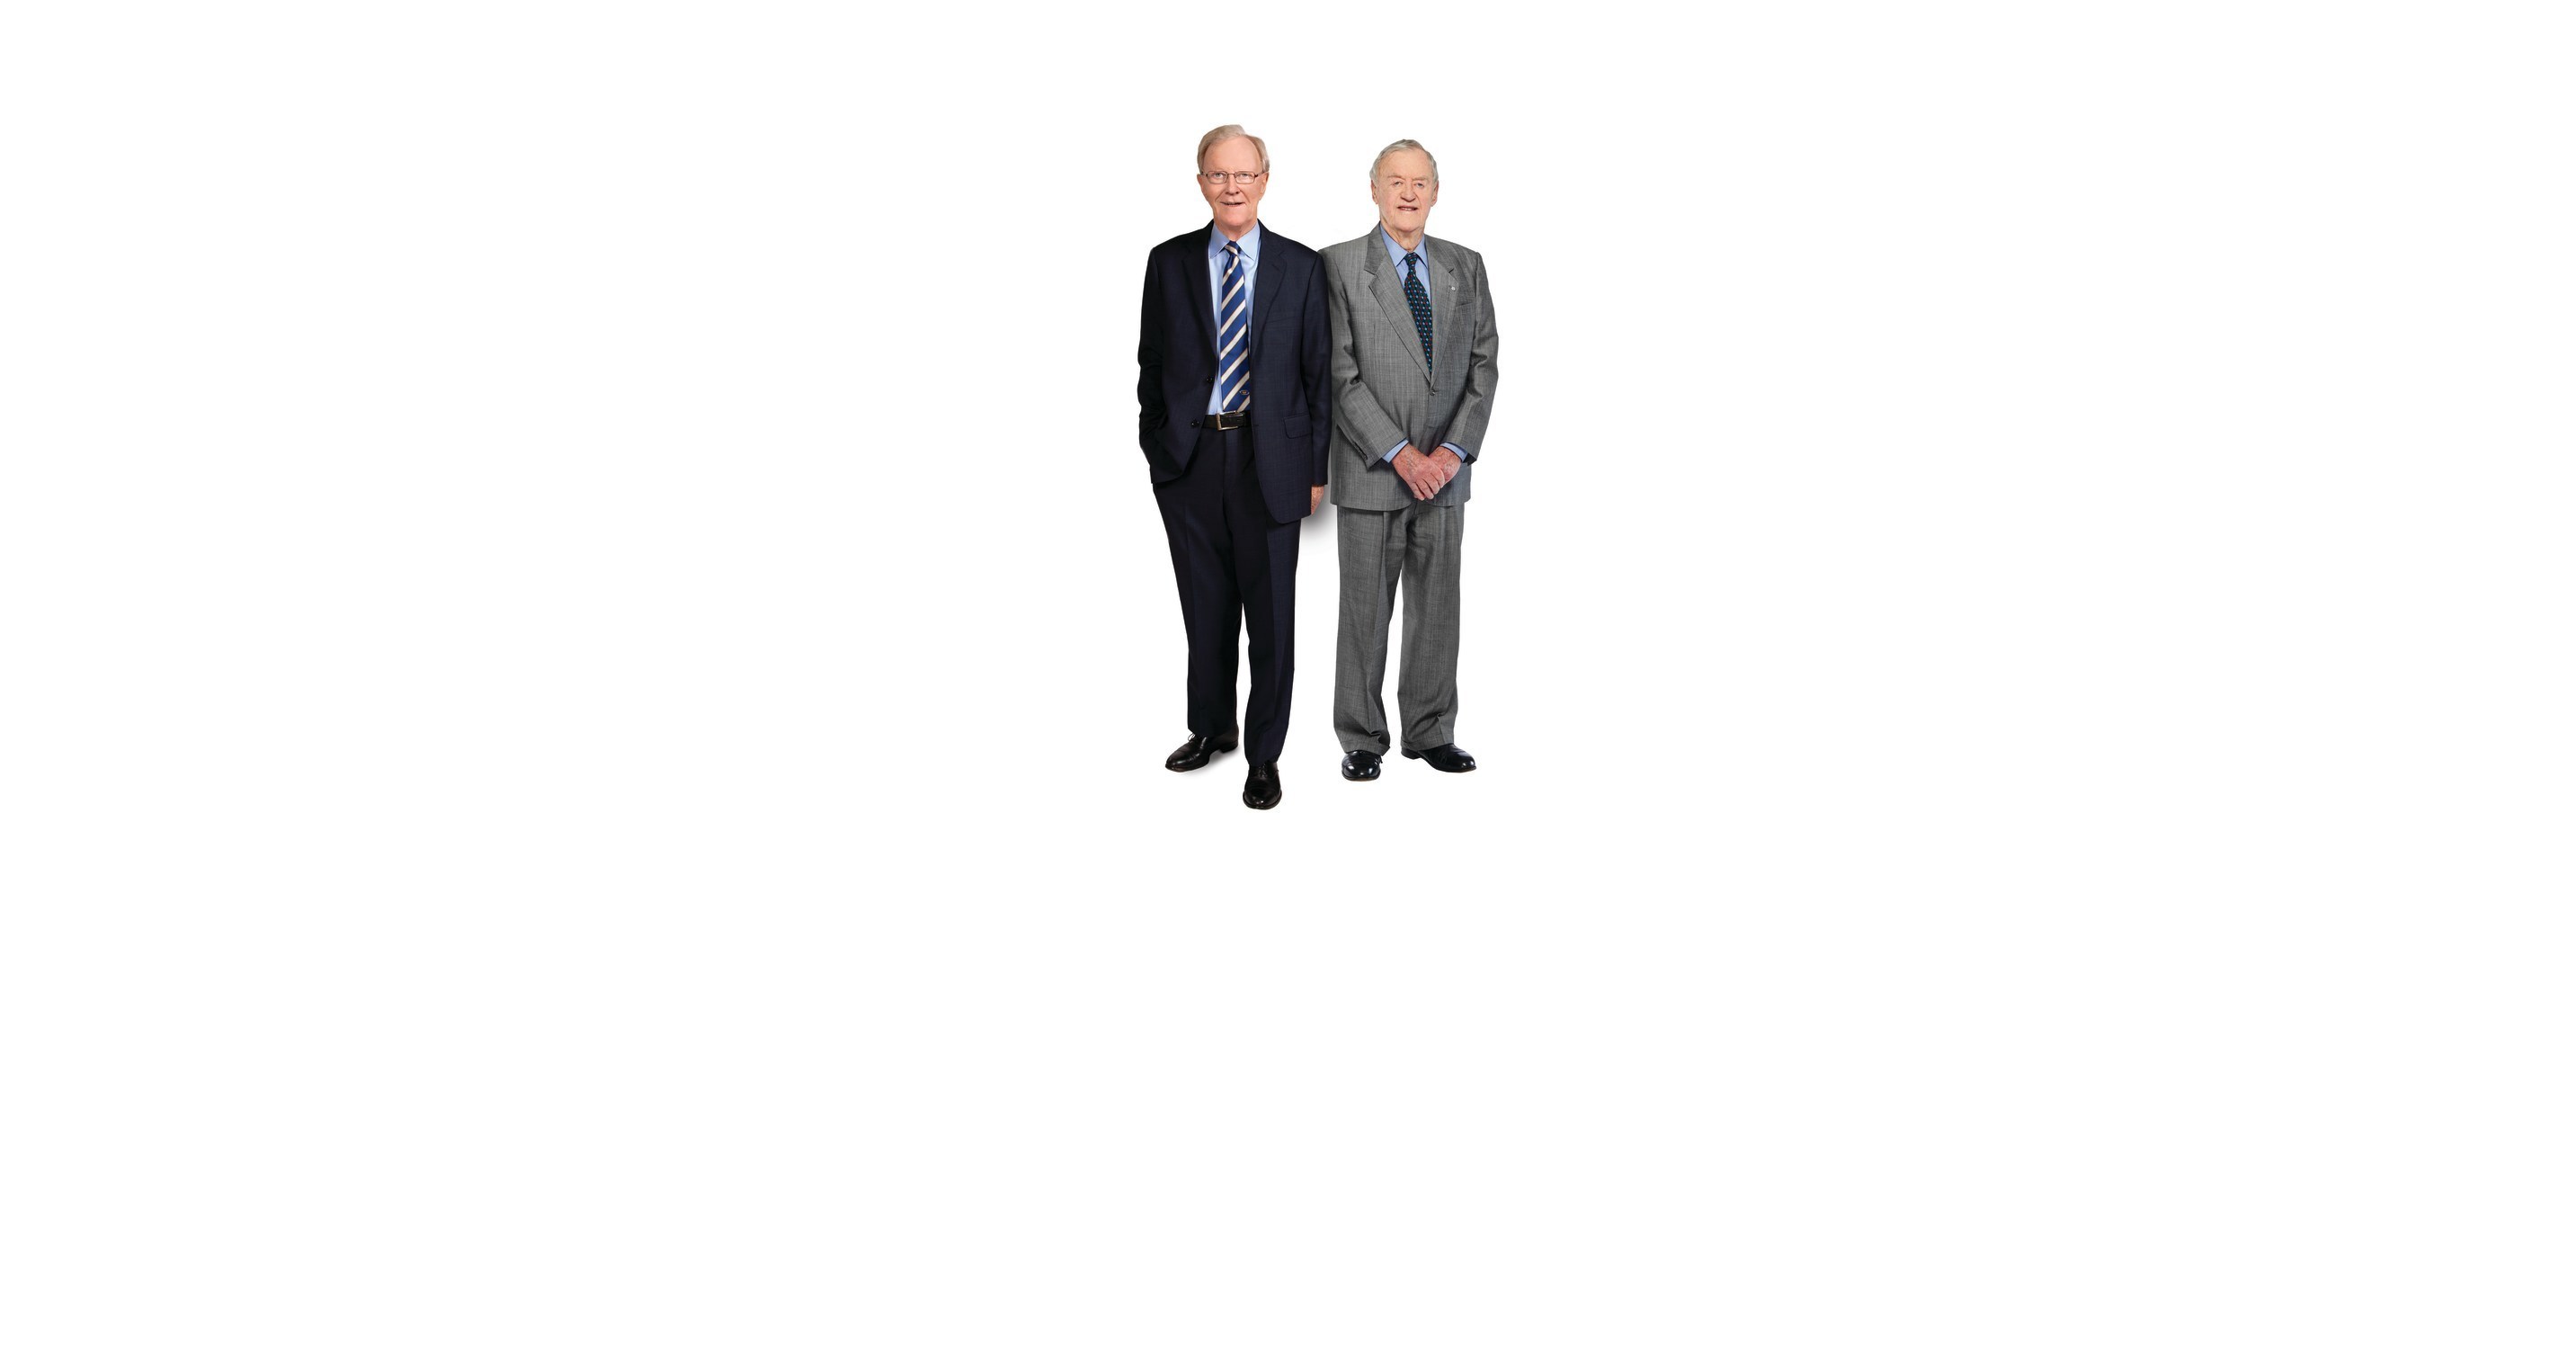 David Sobey, Chair Emeritus of Sobeys Inc., and Donald Sobey, Chair